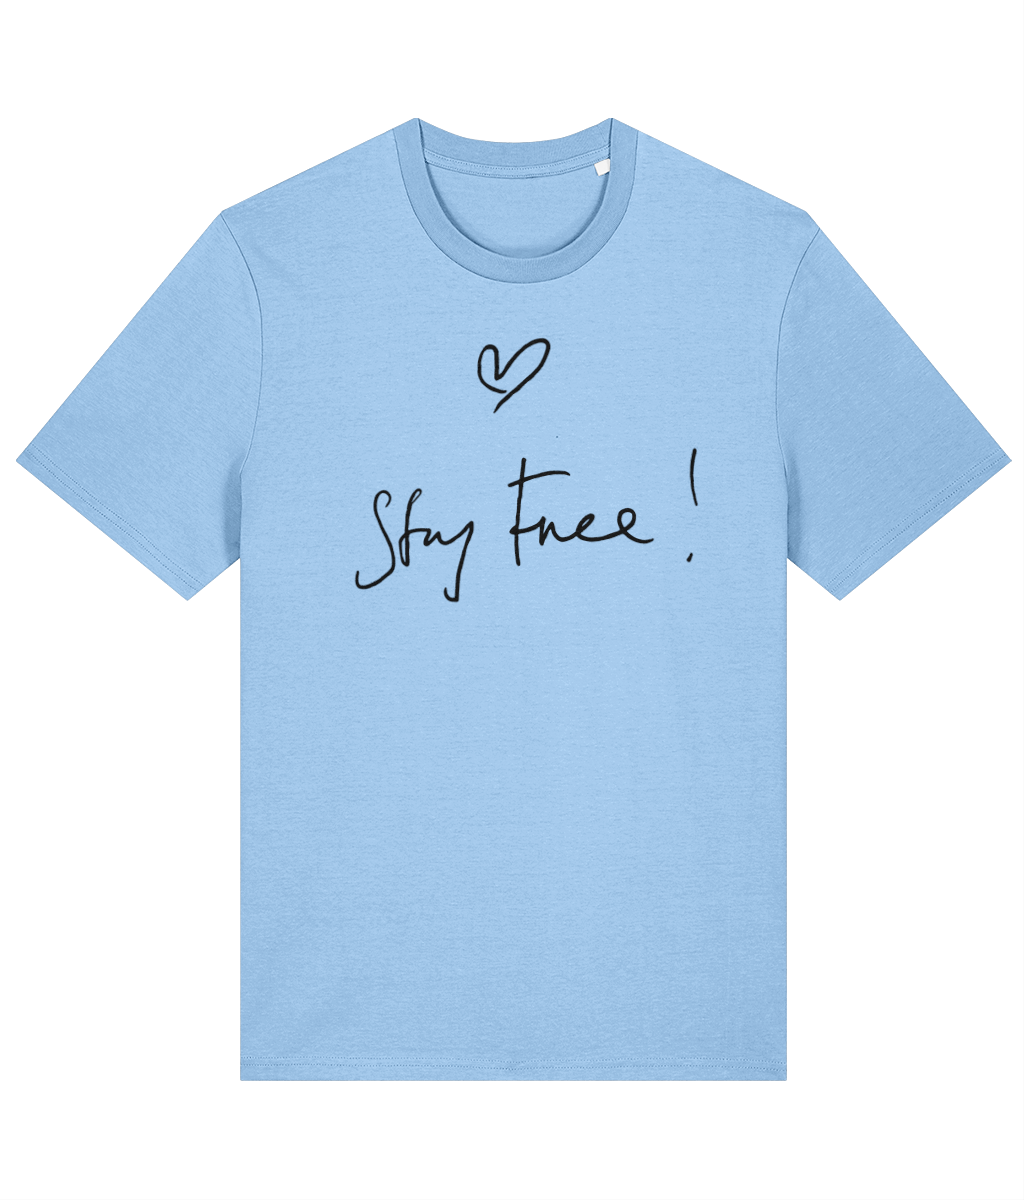 Unisex TShirt - Stay Free -Russell's Writing